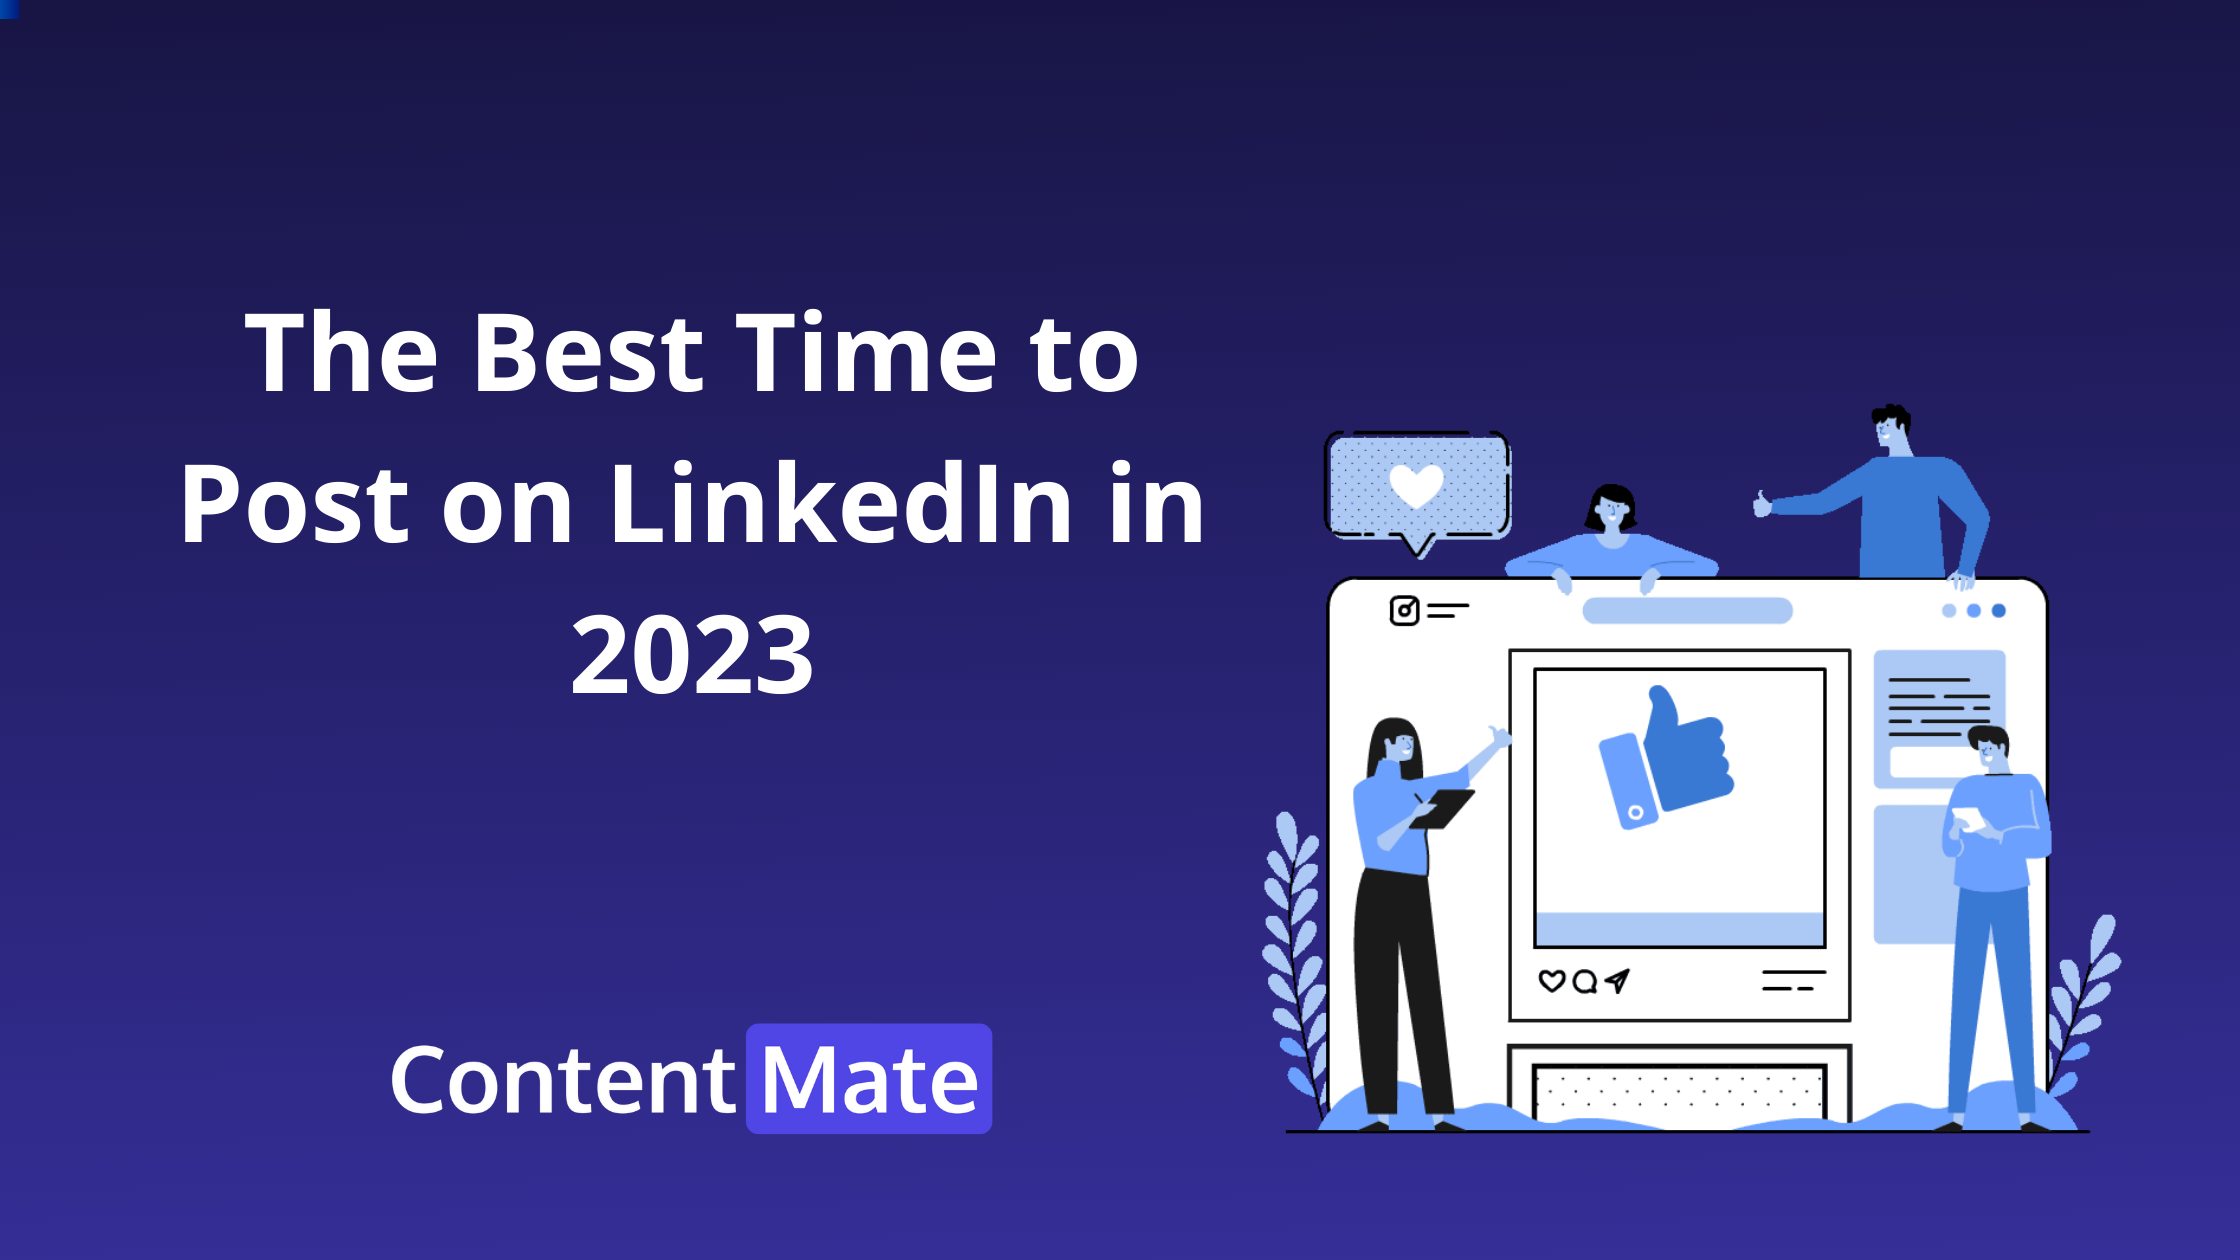 The Best Time to Post on LinkedIn in 2023